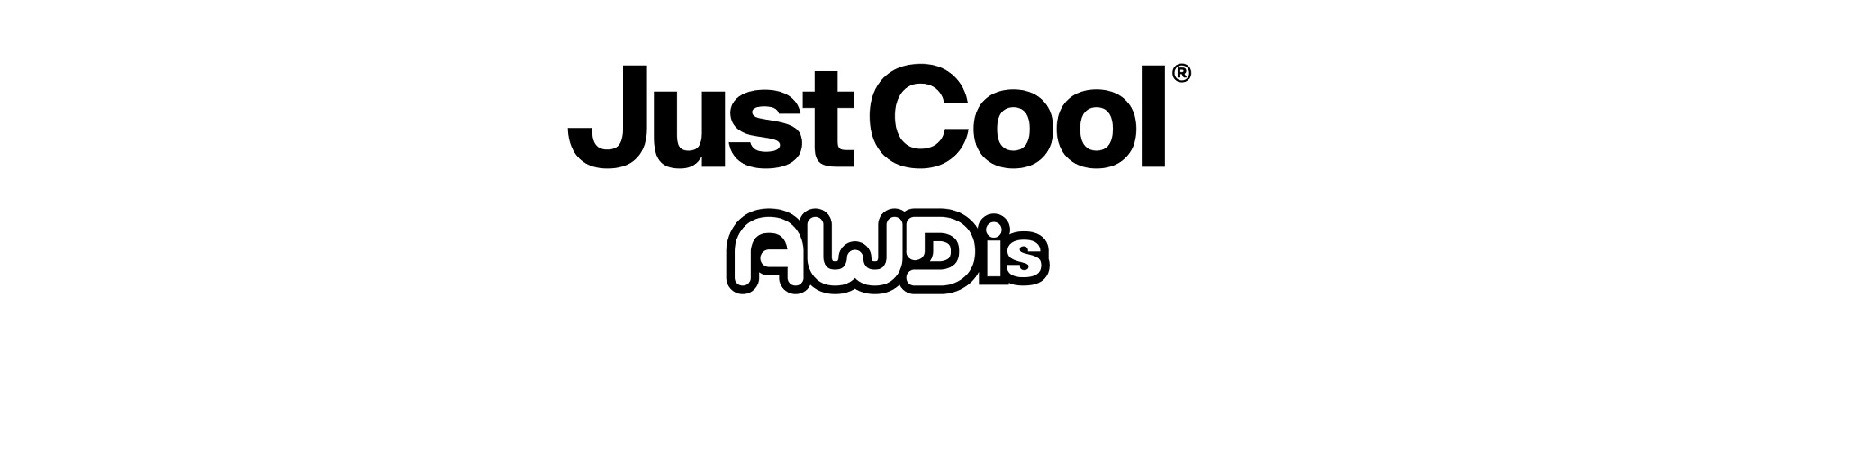 Vêtements Just Cool By Awdis | Mes Tenues Perso